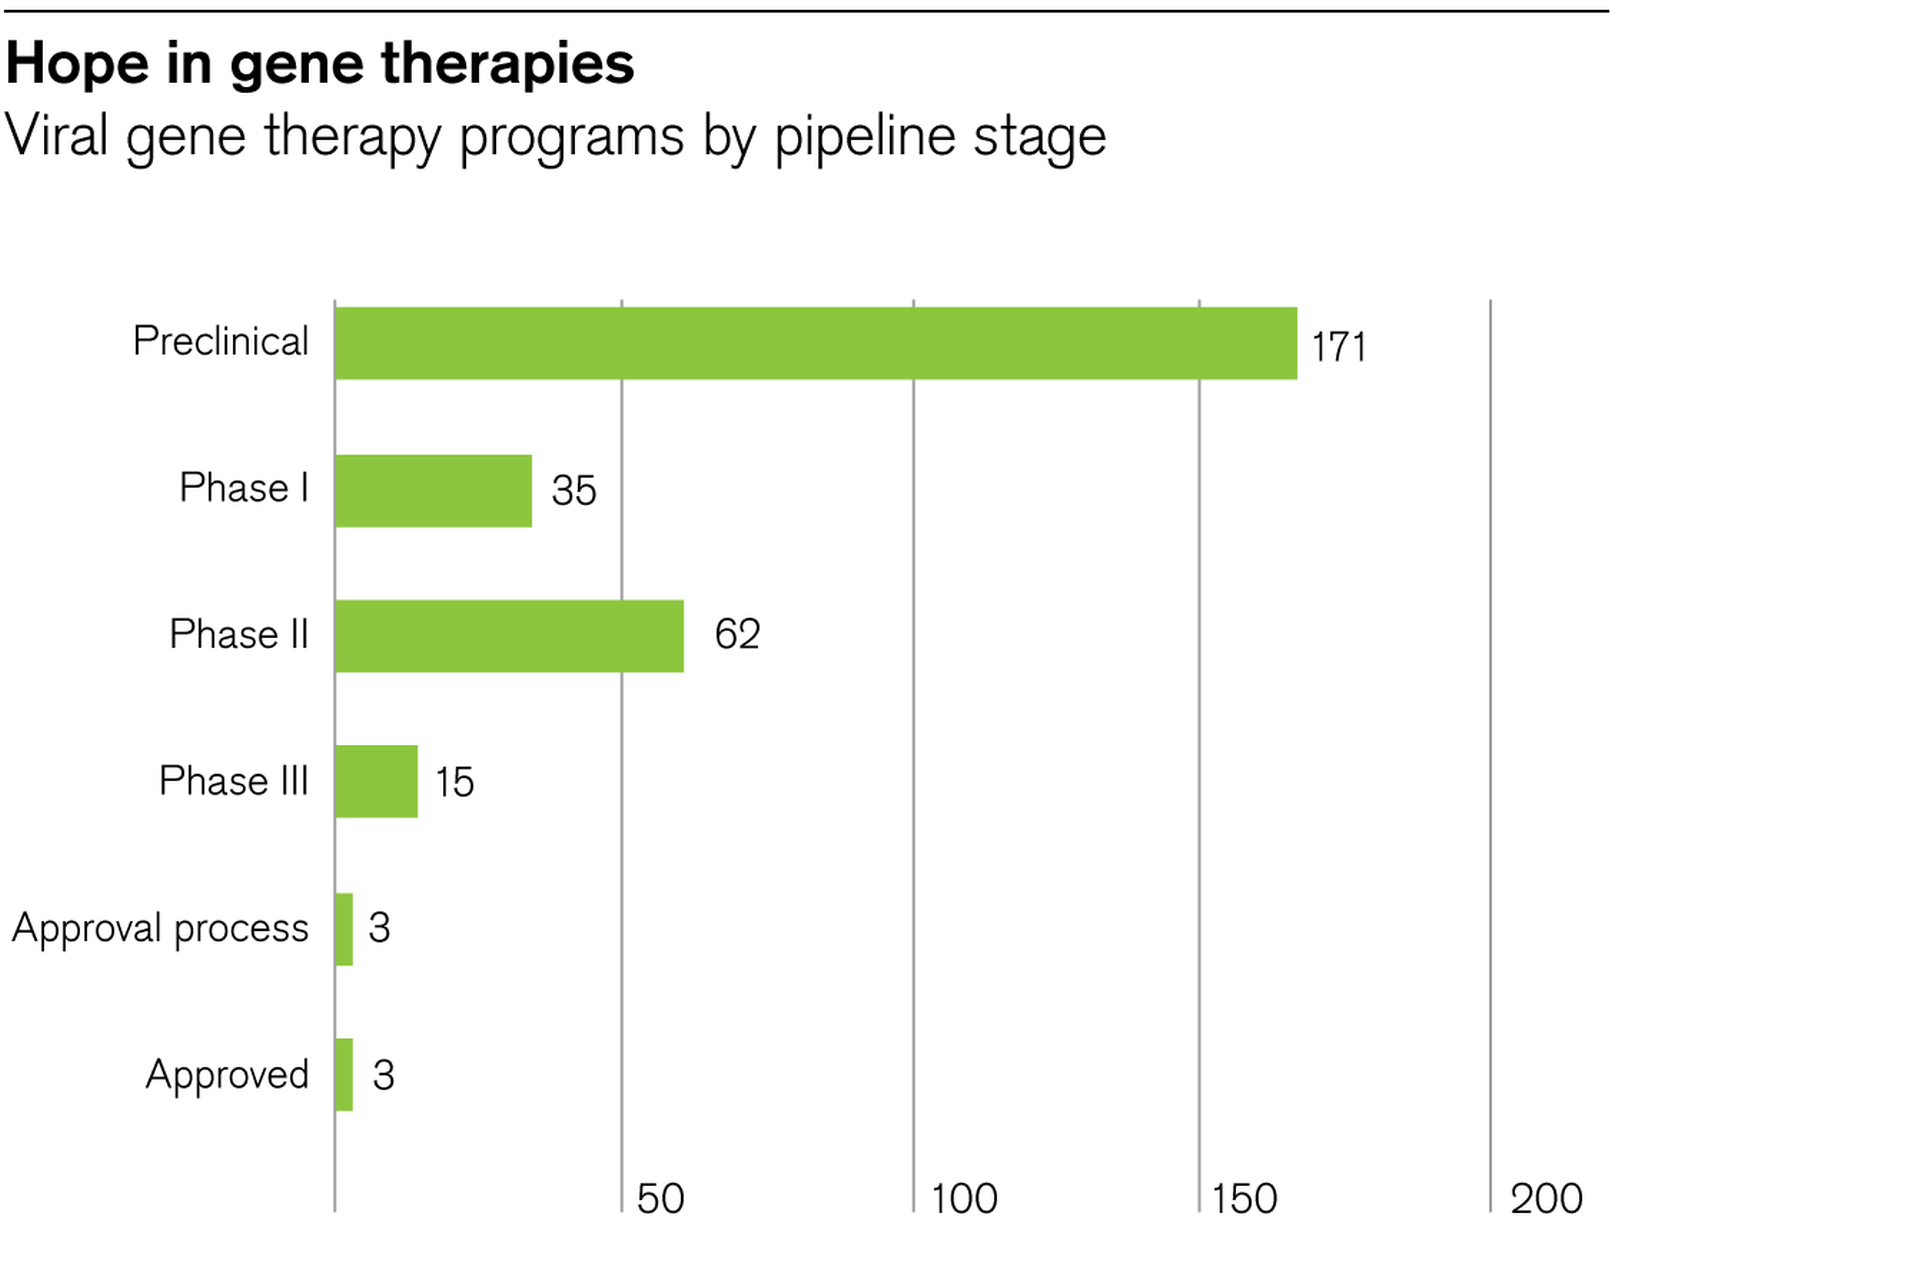 Viral gene therapy programs by pipeline stage